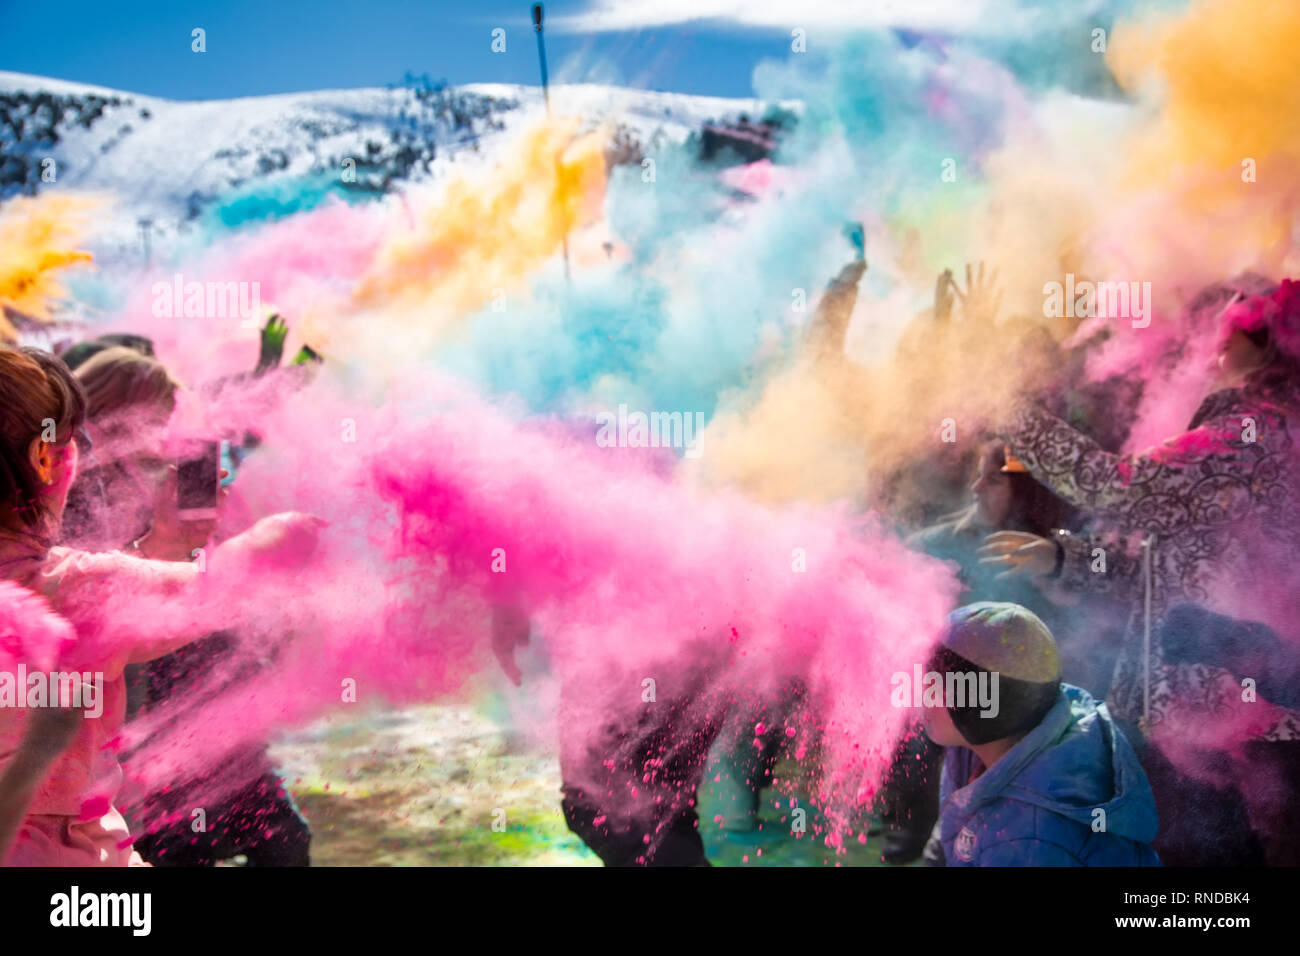 https://c8.alamy.com/comp/RNDBK4/seli-greece-february-17-2019-crowds-of-unidentified-people-throw-colour-powderduring-the-annual-winter-event-day-of-colours-in-the-snowy-landsc-RNDBK4.jpg